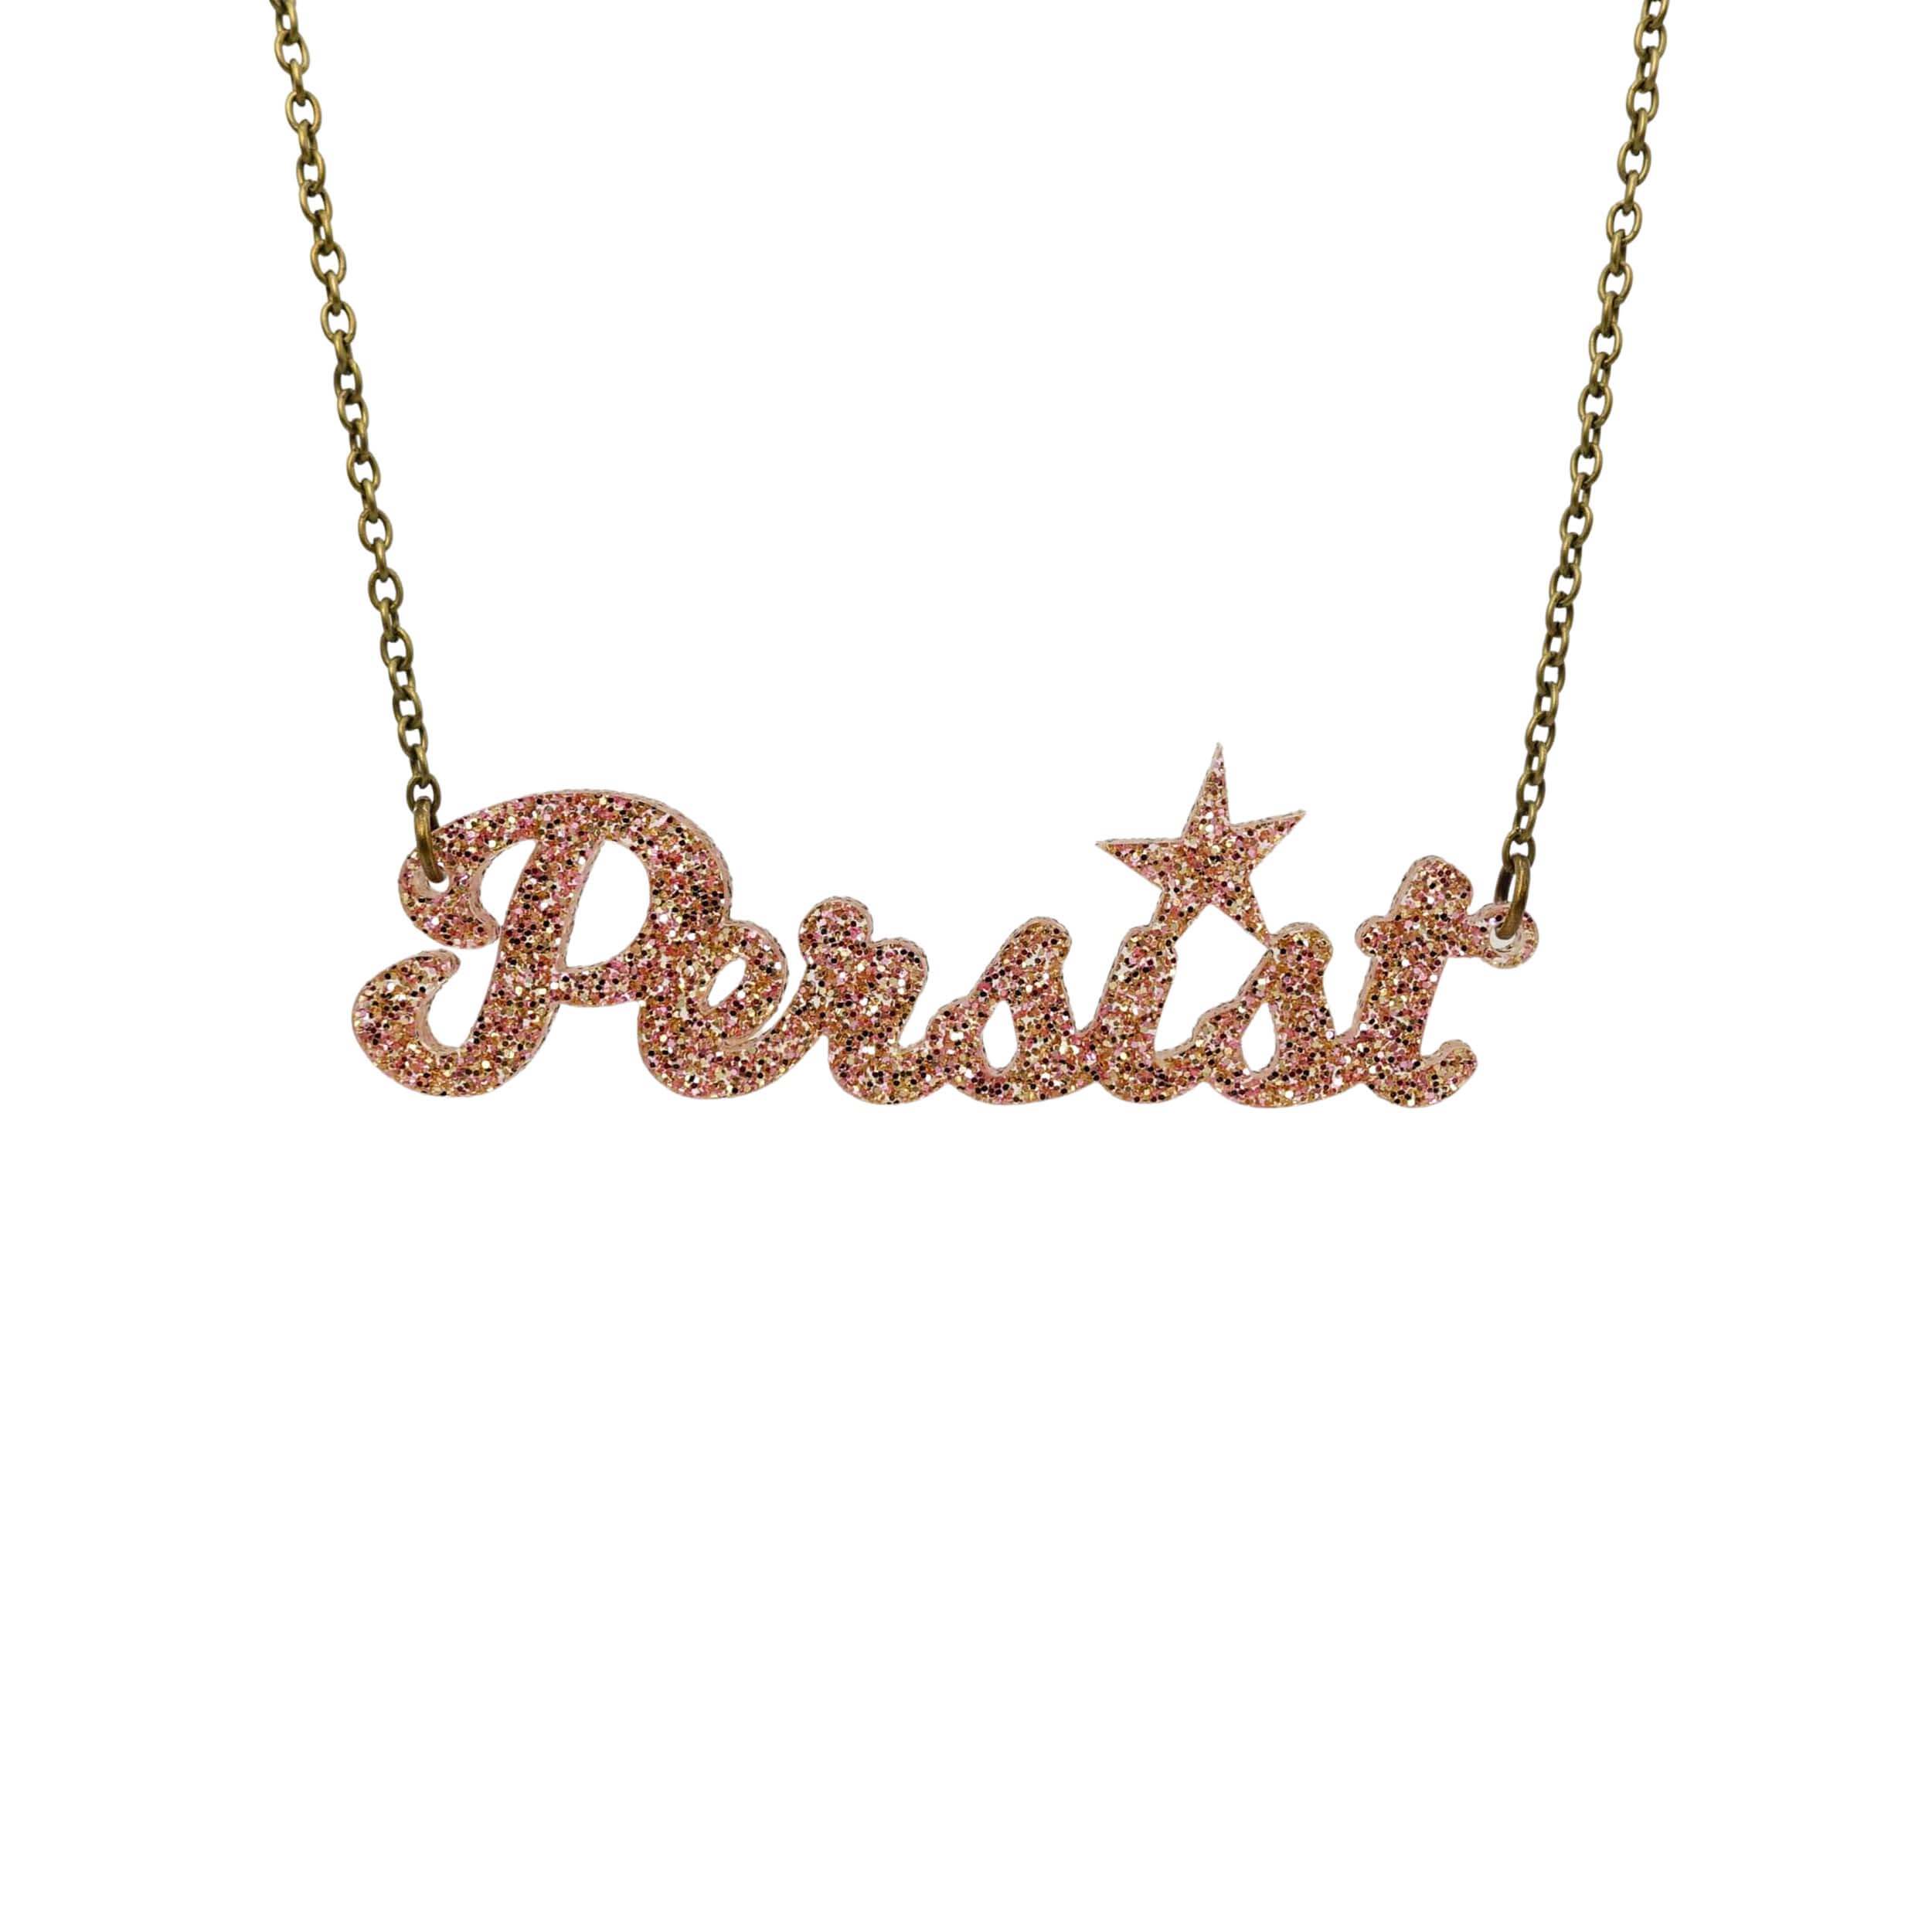 Persist necklace in in pink fizz glitter, shown hanging against a white background.